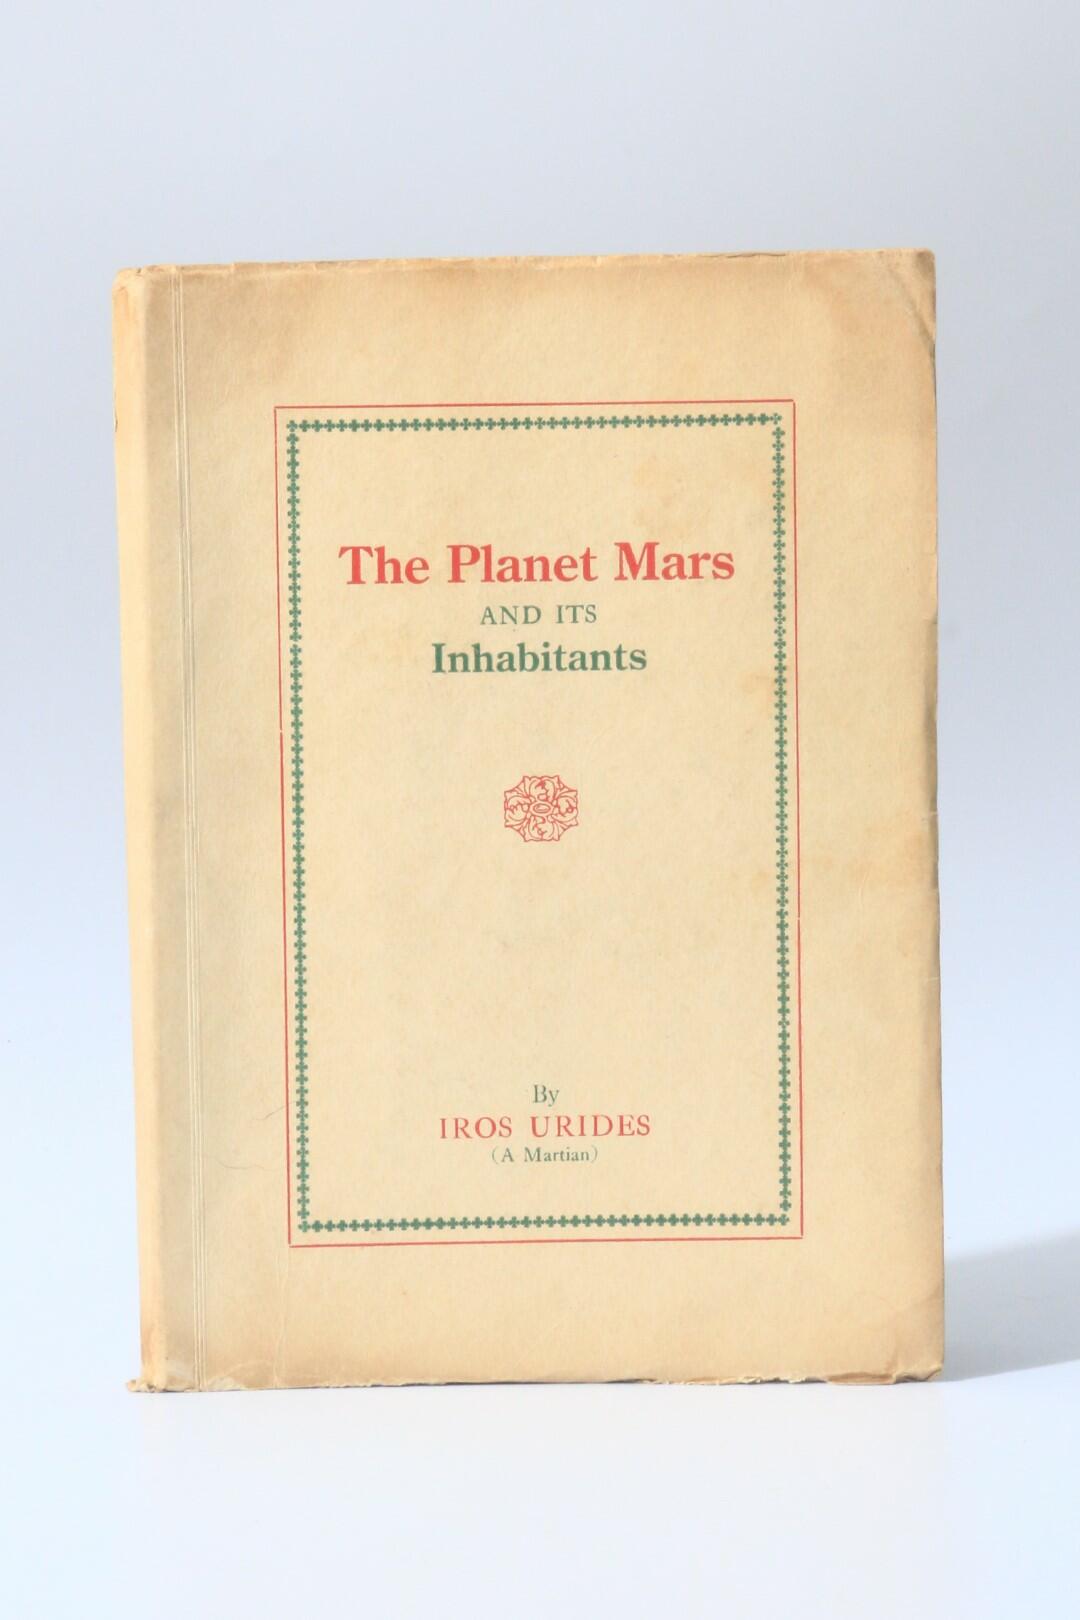 Iros Urides, A Martian [ed. J.L. Kennon] - The Planet Mars and its Inhabitants: A Psychic Revelation - Mabel J. McKean, 1922, First Edition.